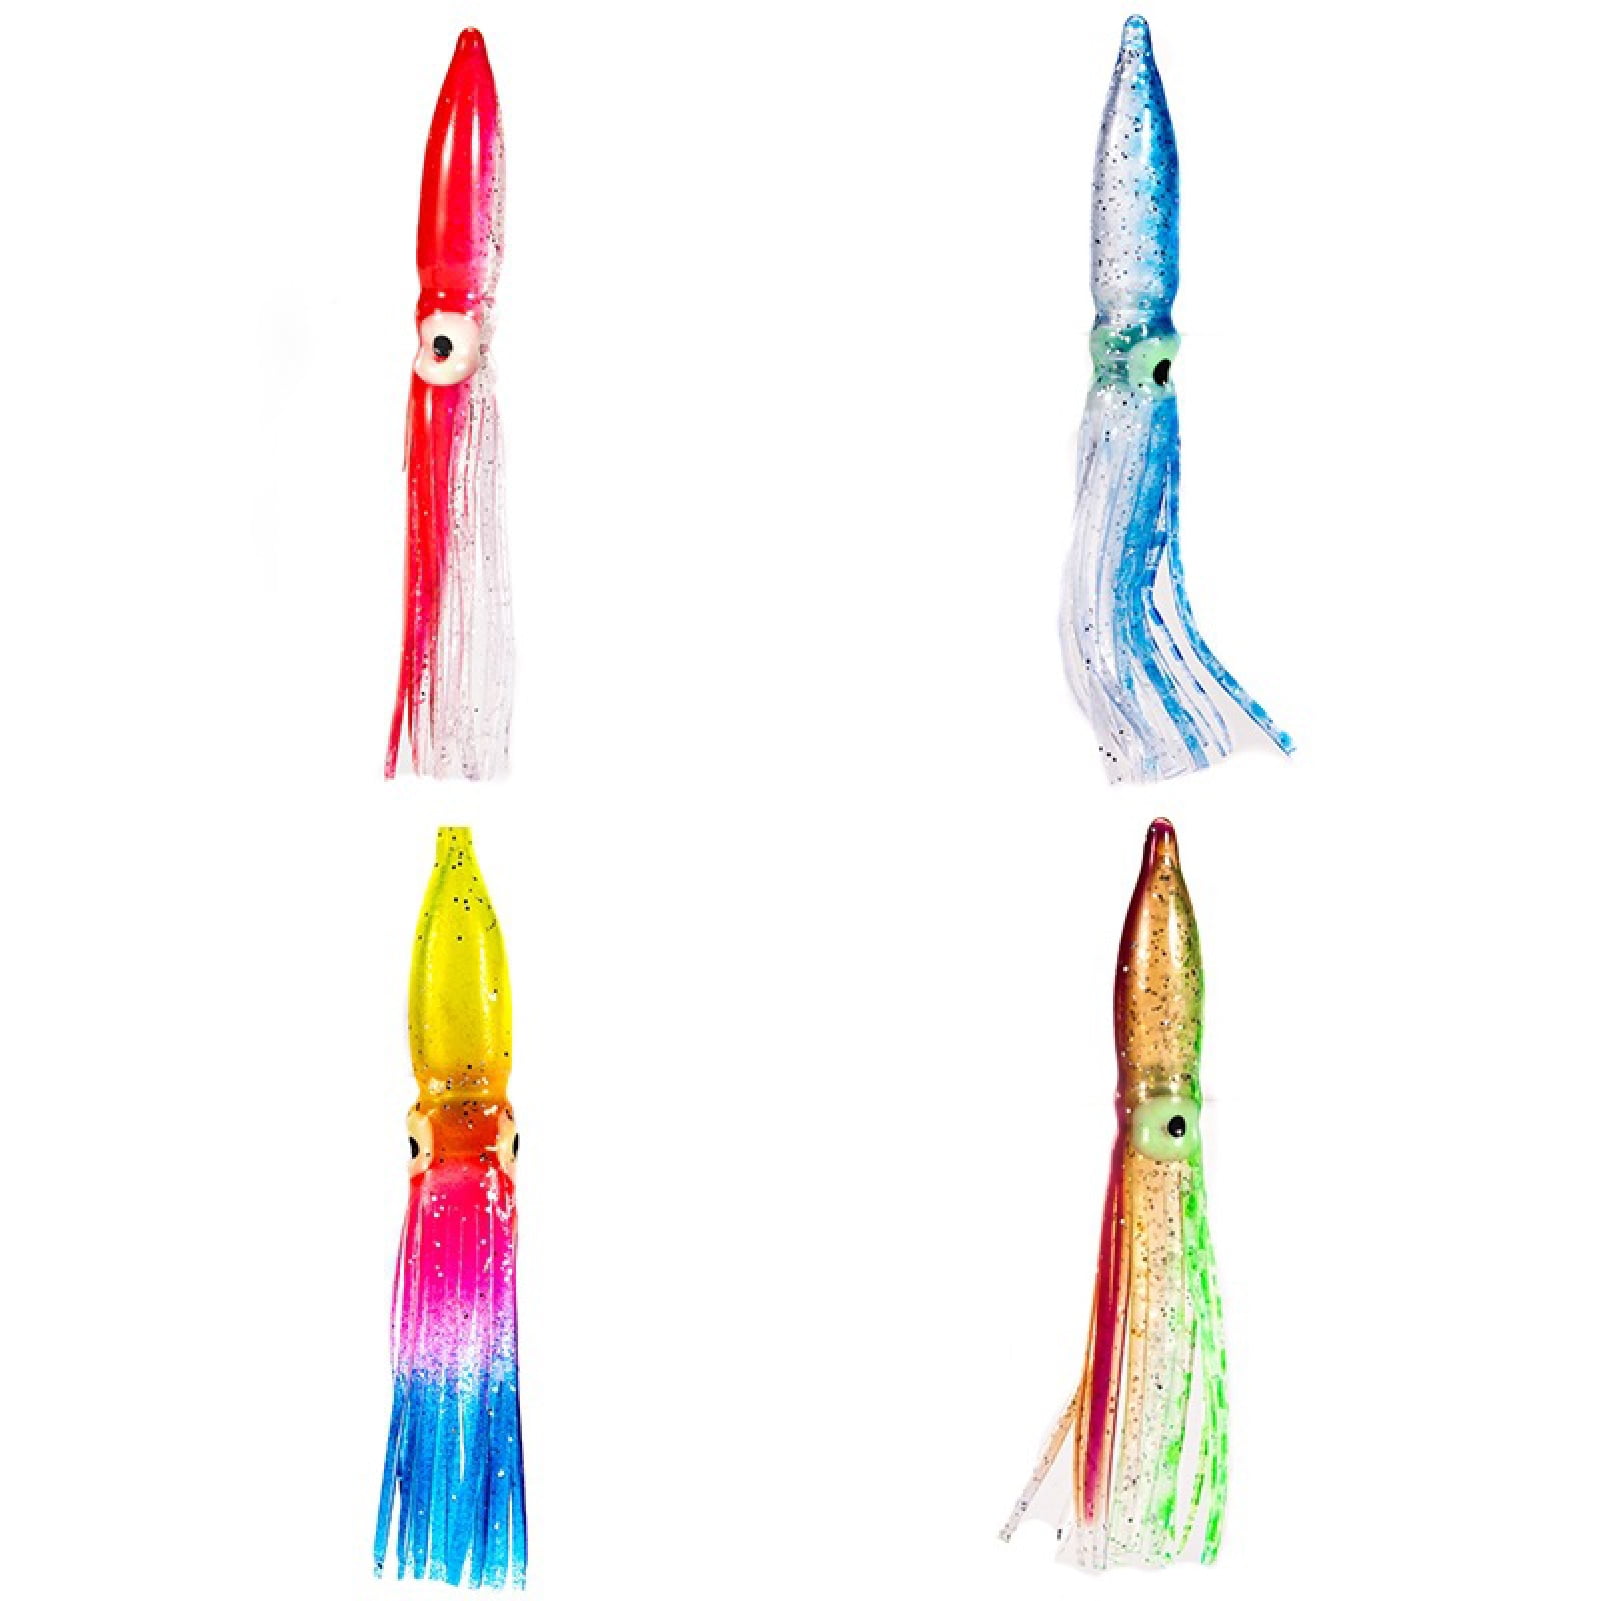 Octopus Squid Fishing Lure Skirts- 10pcs 8cm Saltwater Trolling Fishing  Lures Soft Plastic Octopus Bait Squid Skirt, Fake Lure Bionic Soft Bait for  Outdoor Fishing 